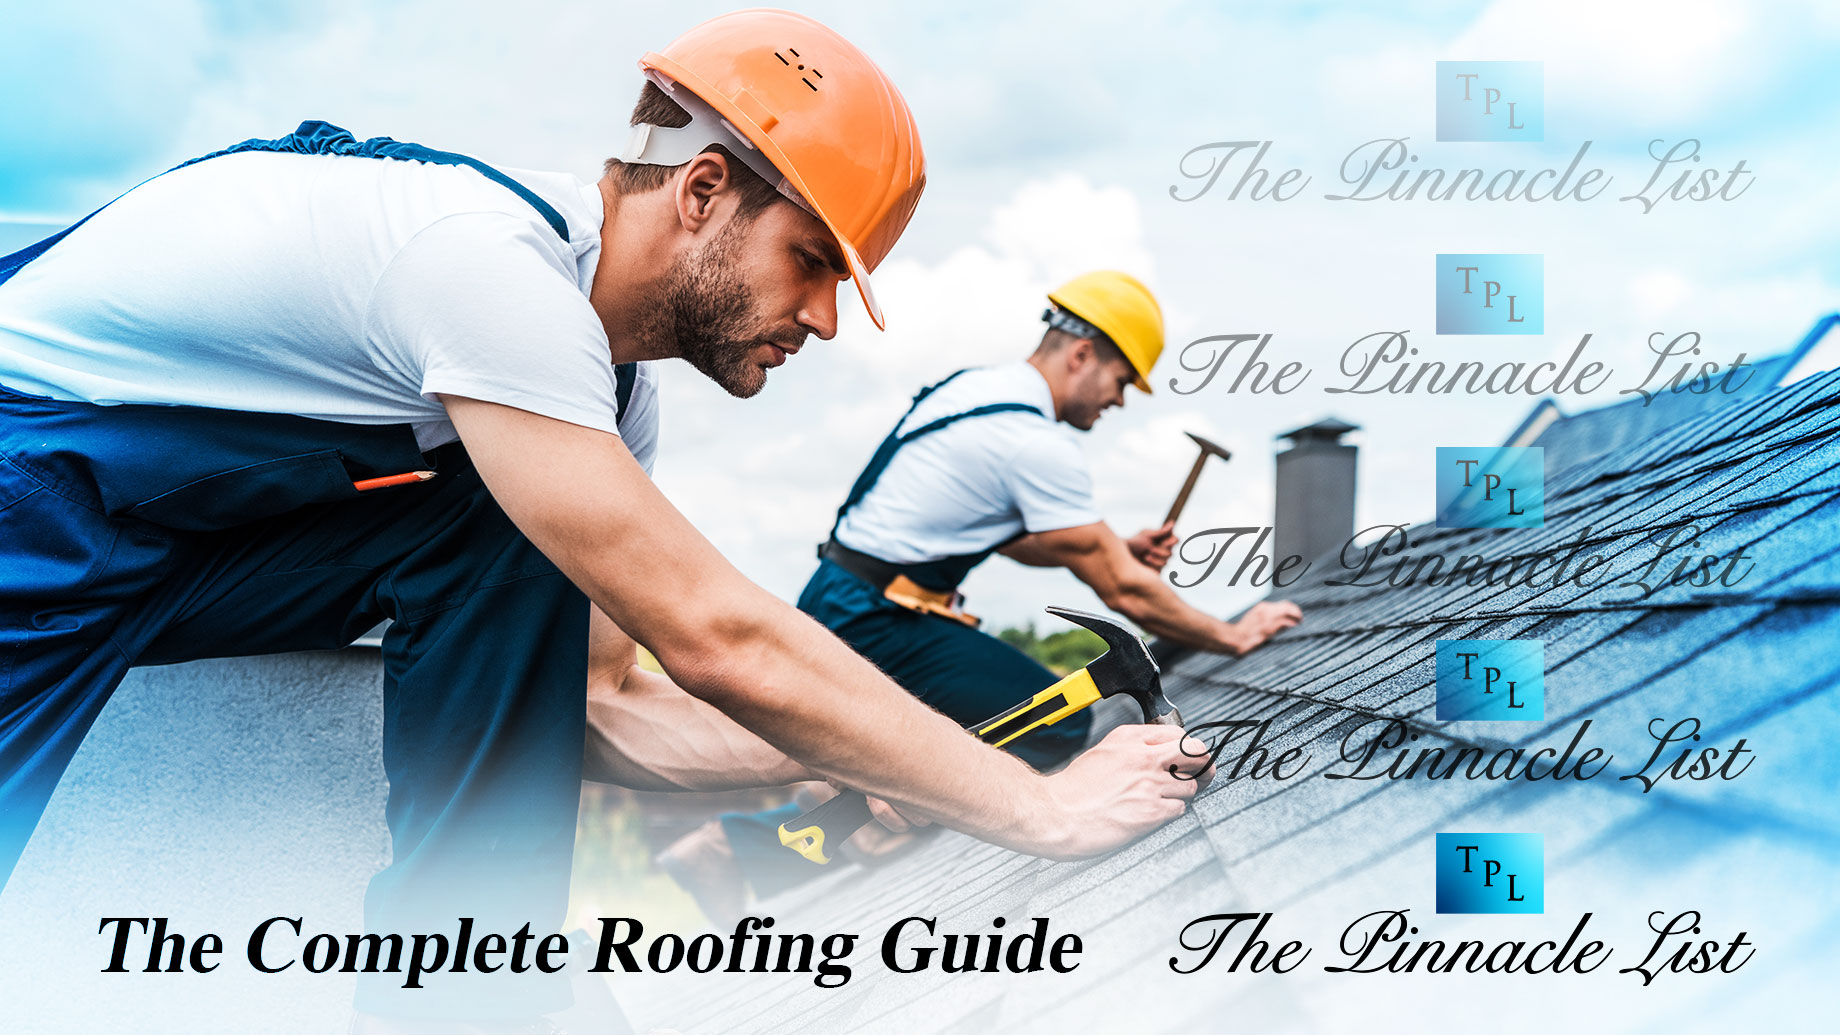 The Complete Roofing Guide